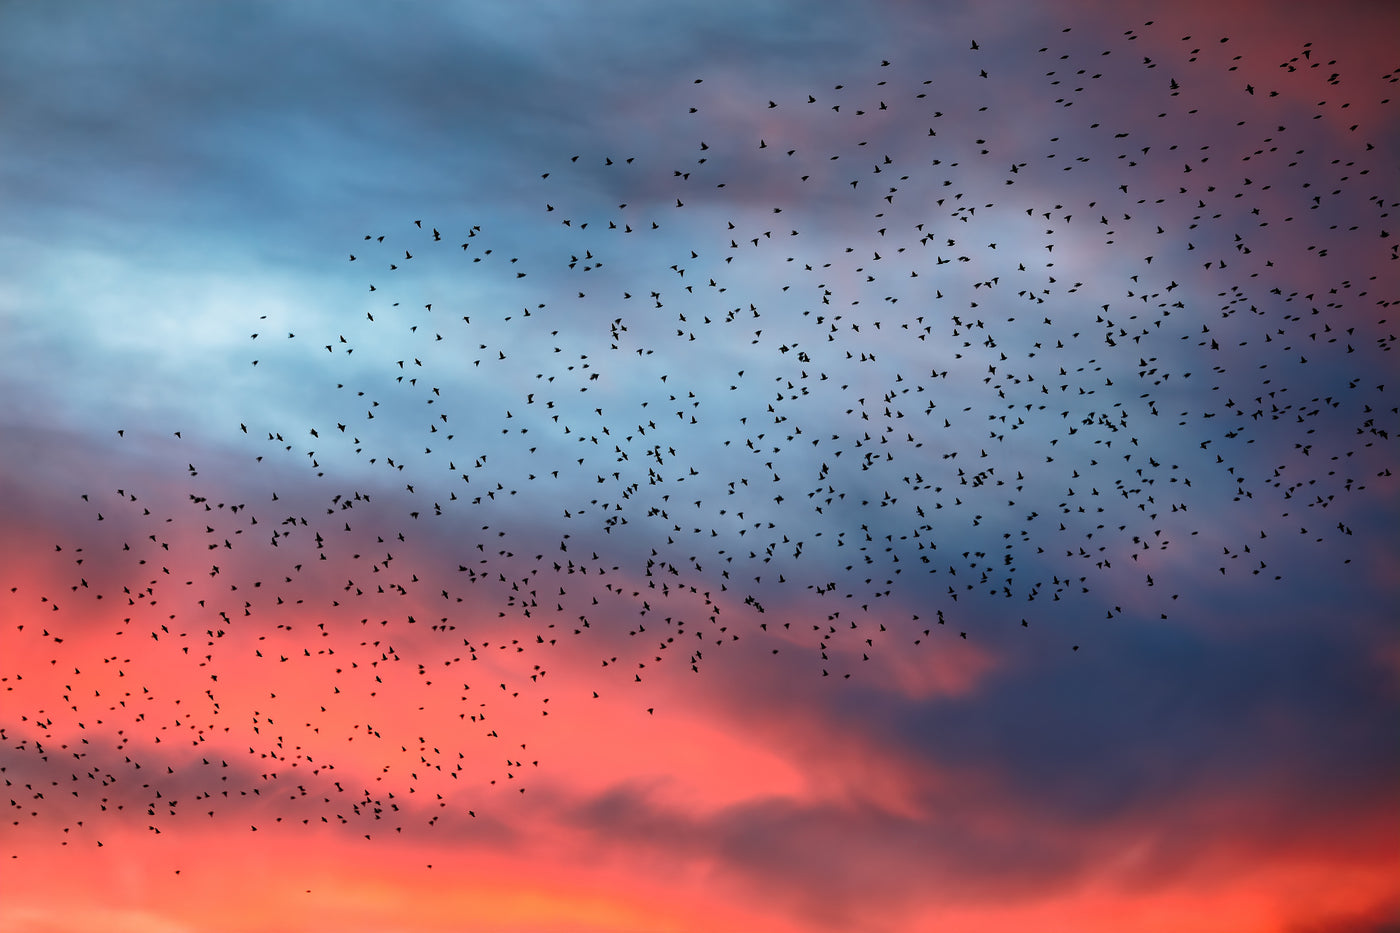 Image of sunset sky with many birds flying around in the distance.